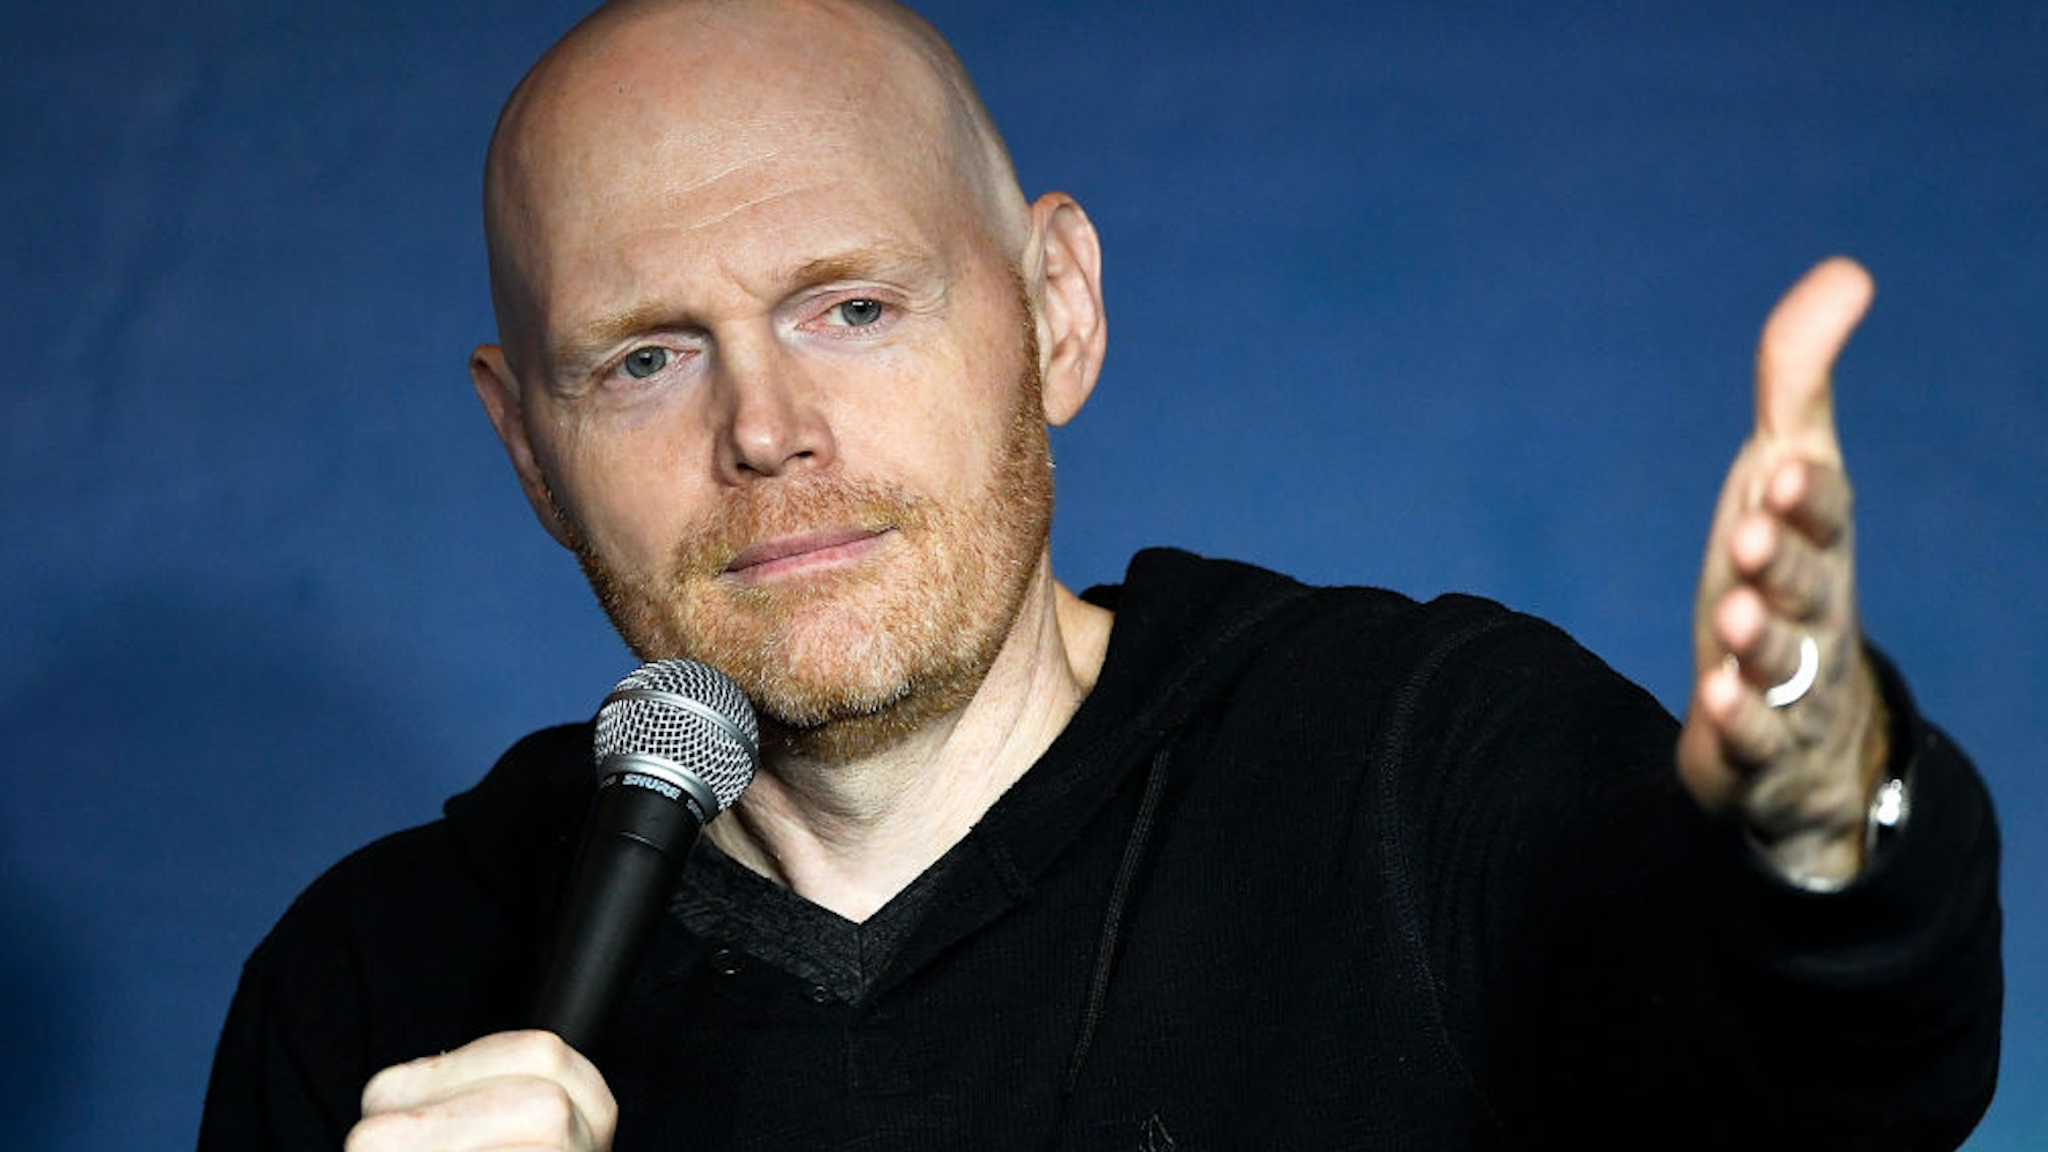 PASADENA, CA - DECEMBER 27: Comedian Bill Burr performs during his appearance at The Ice House Comedy Club on December 27, 2018 in Pasadena, California.